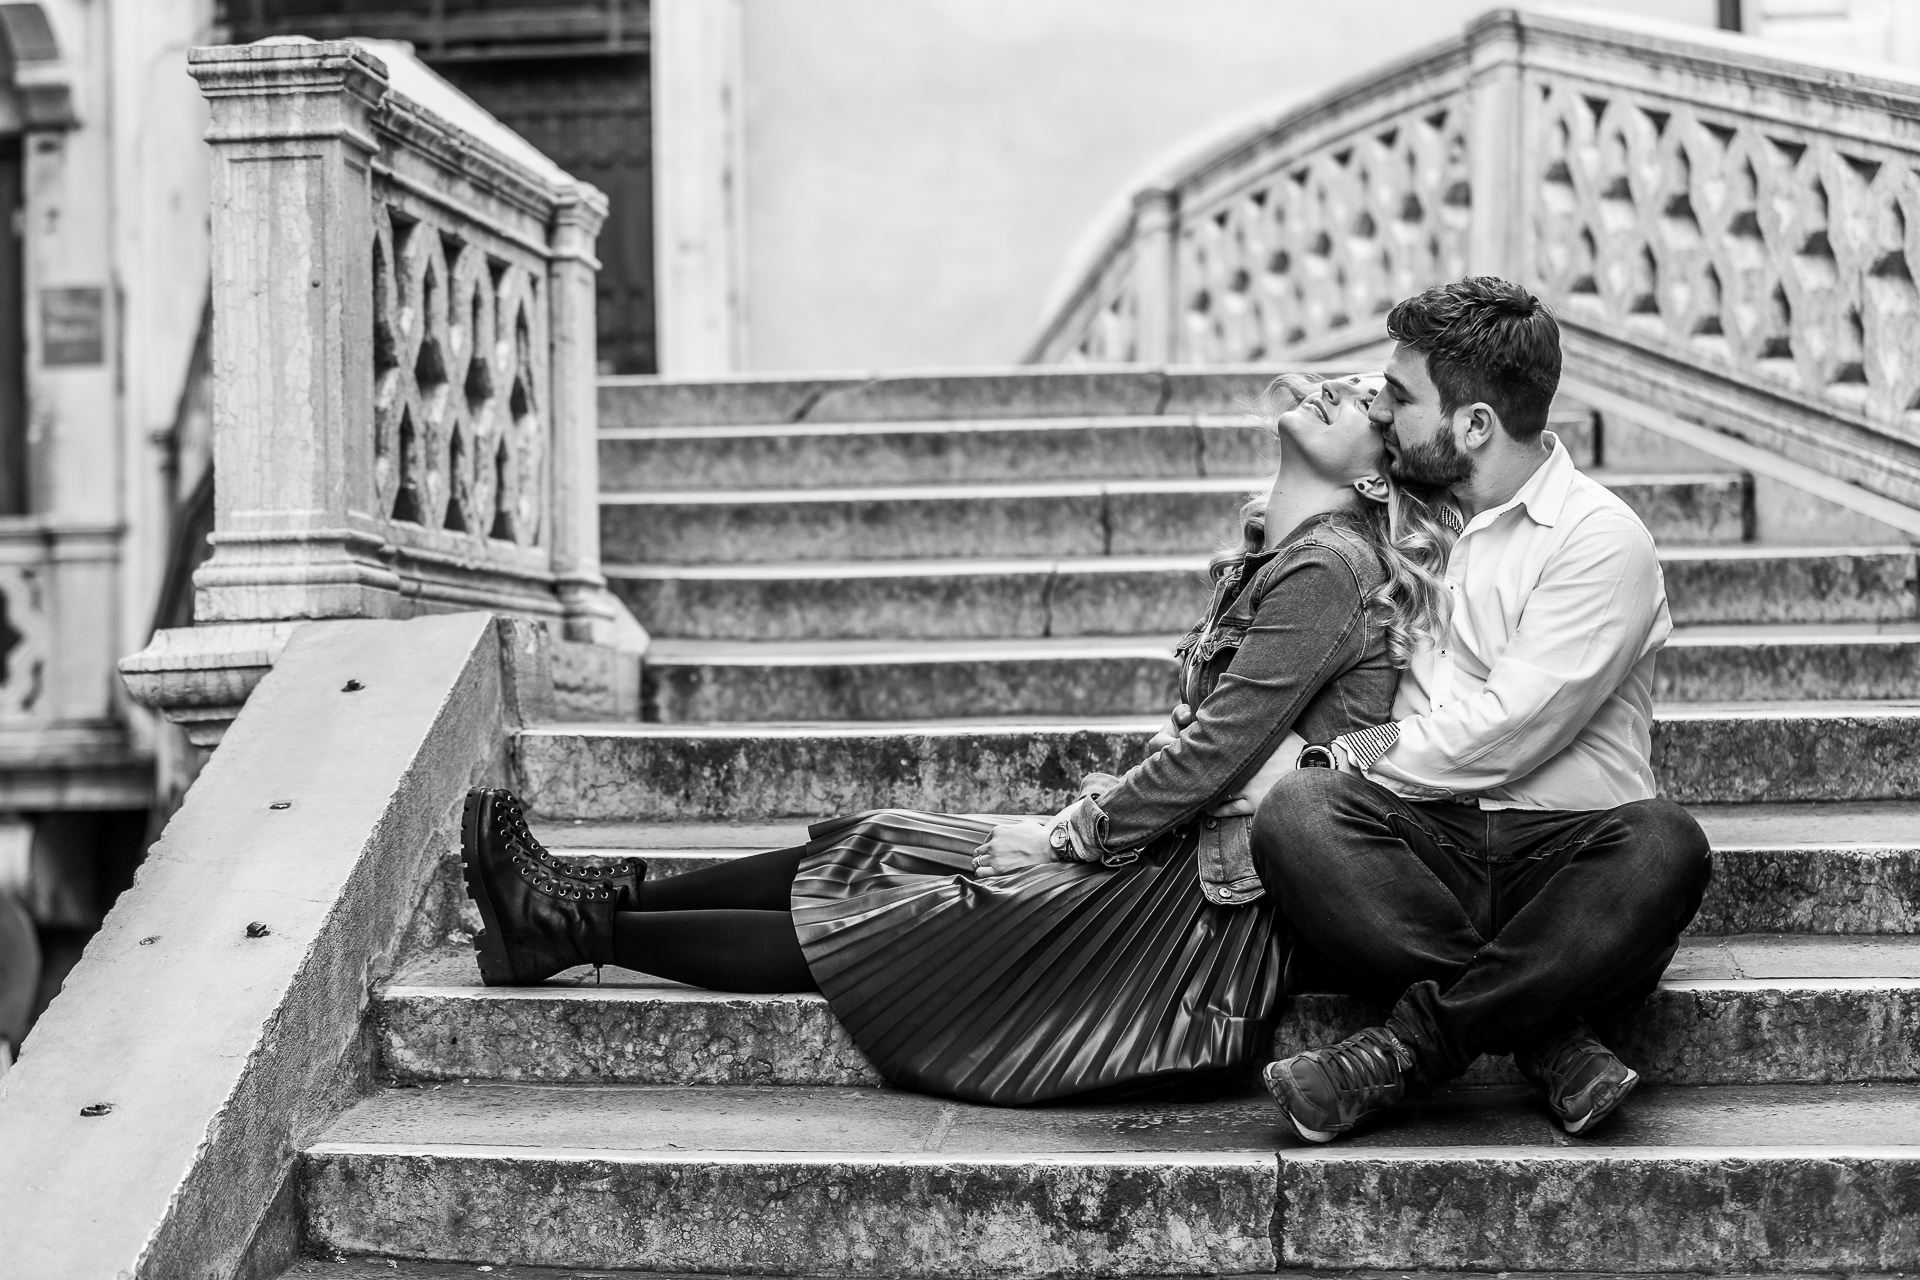 Couple photo session in Venice, Italy with Raluca + Costin by Destination Wedding Photographer Mihai Zaharia09